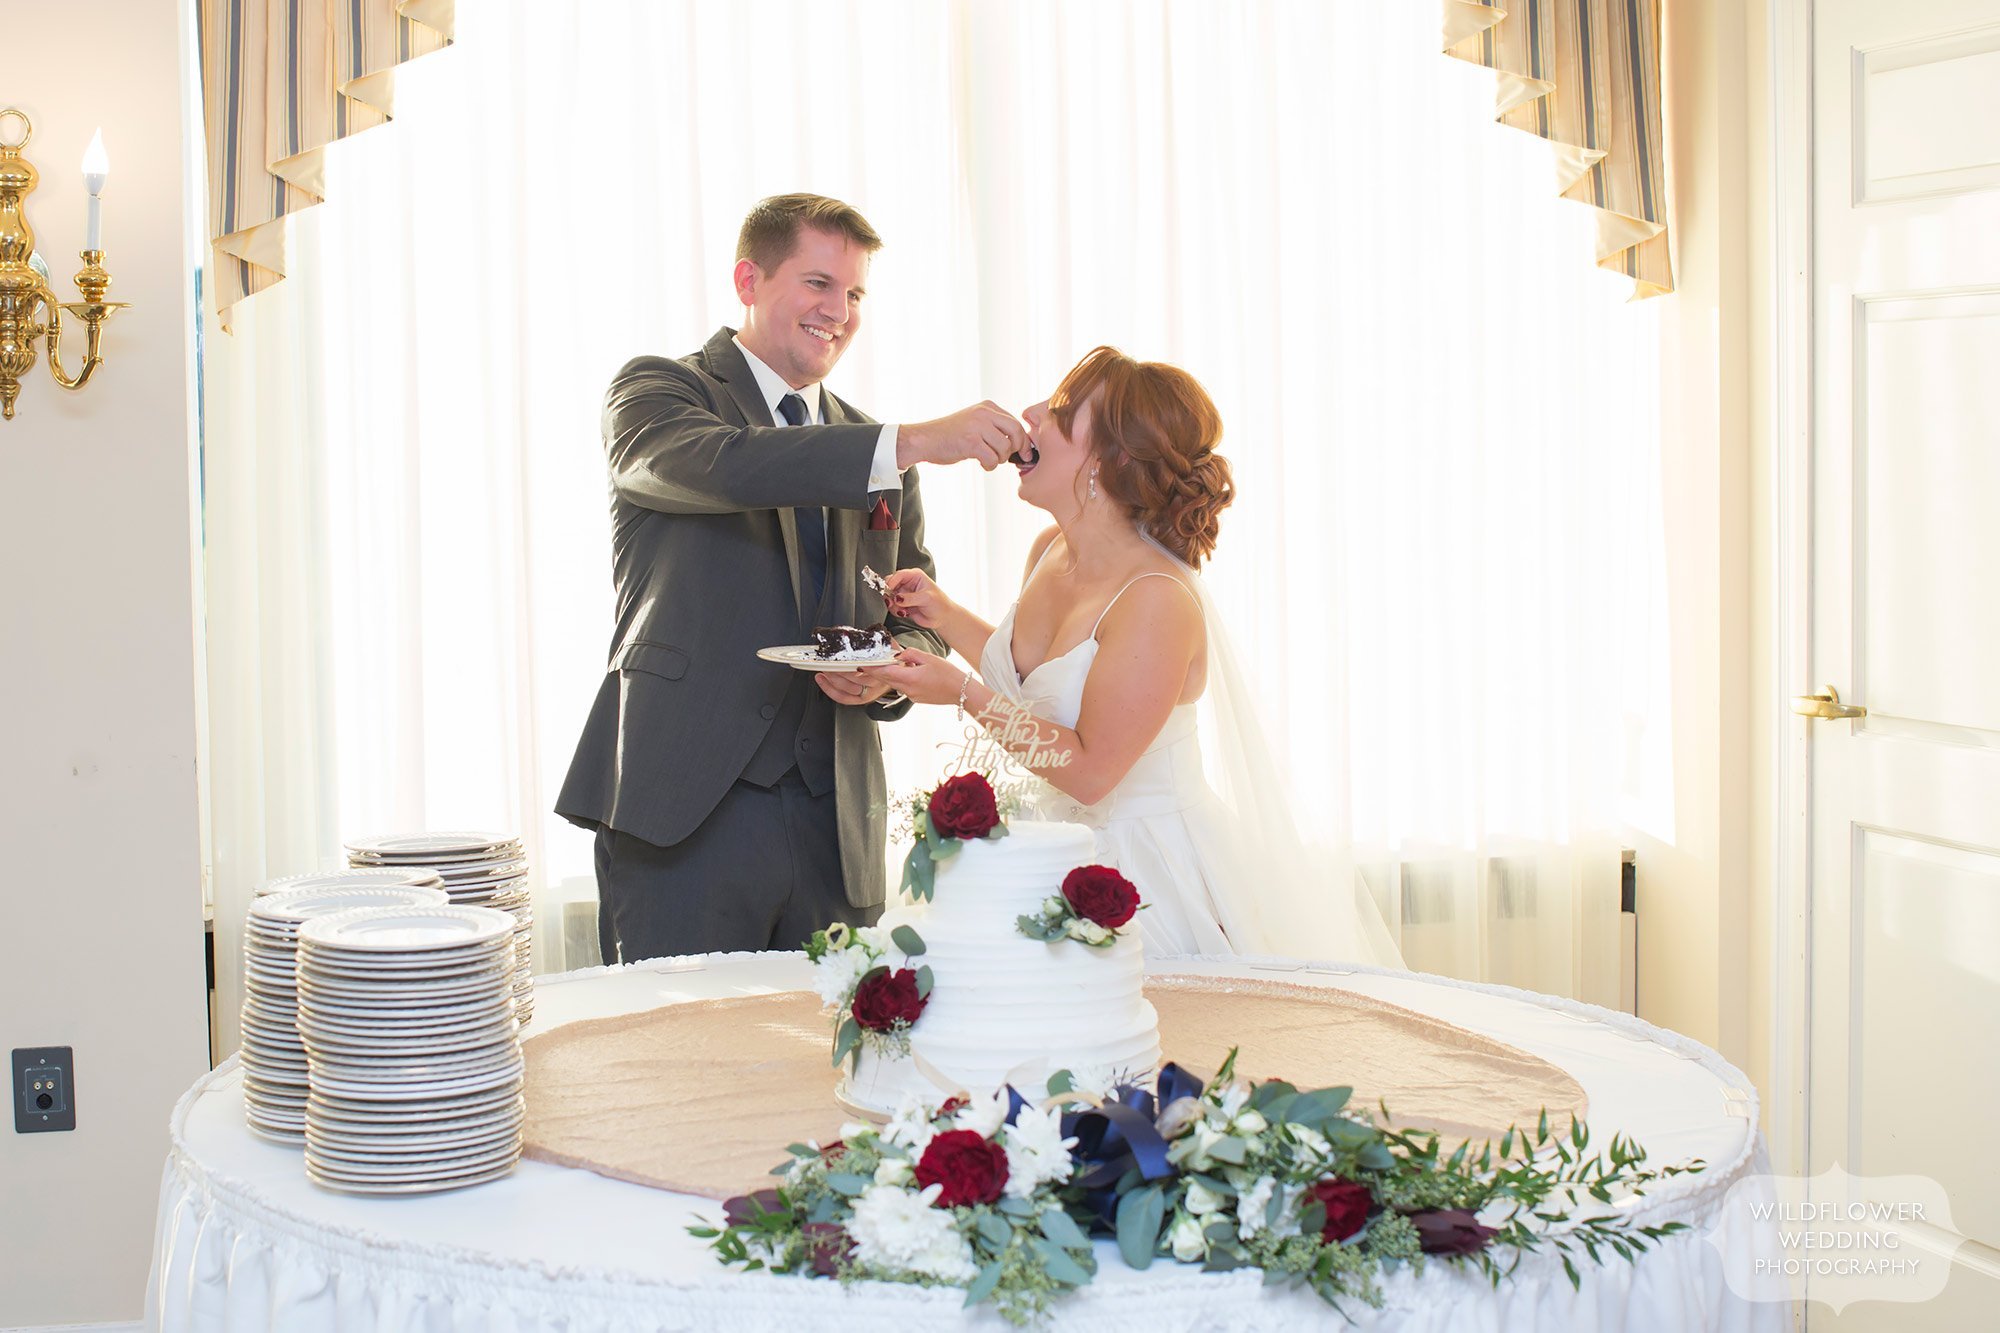 Cake cutting at the Jeff City Country Club.